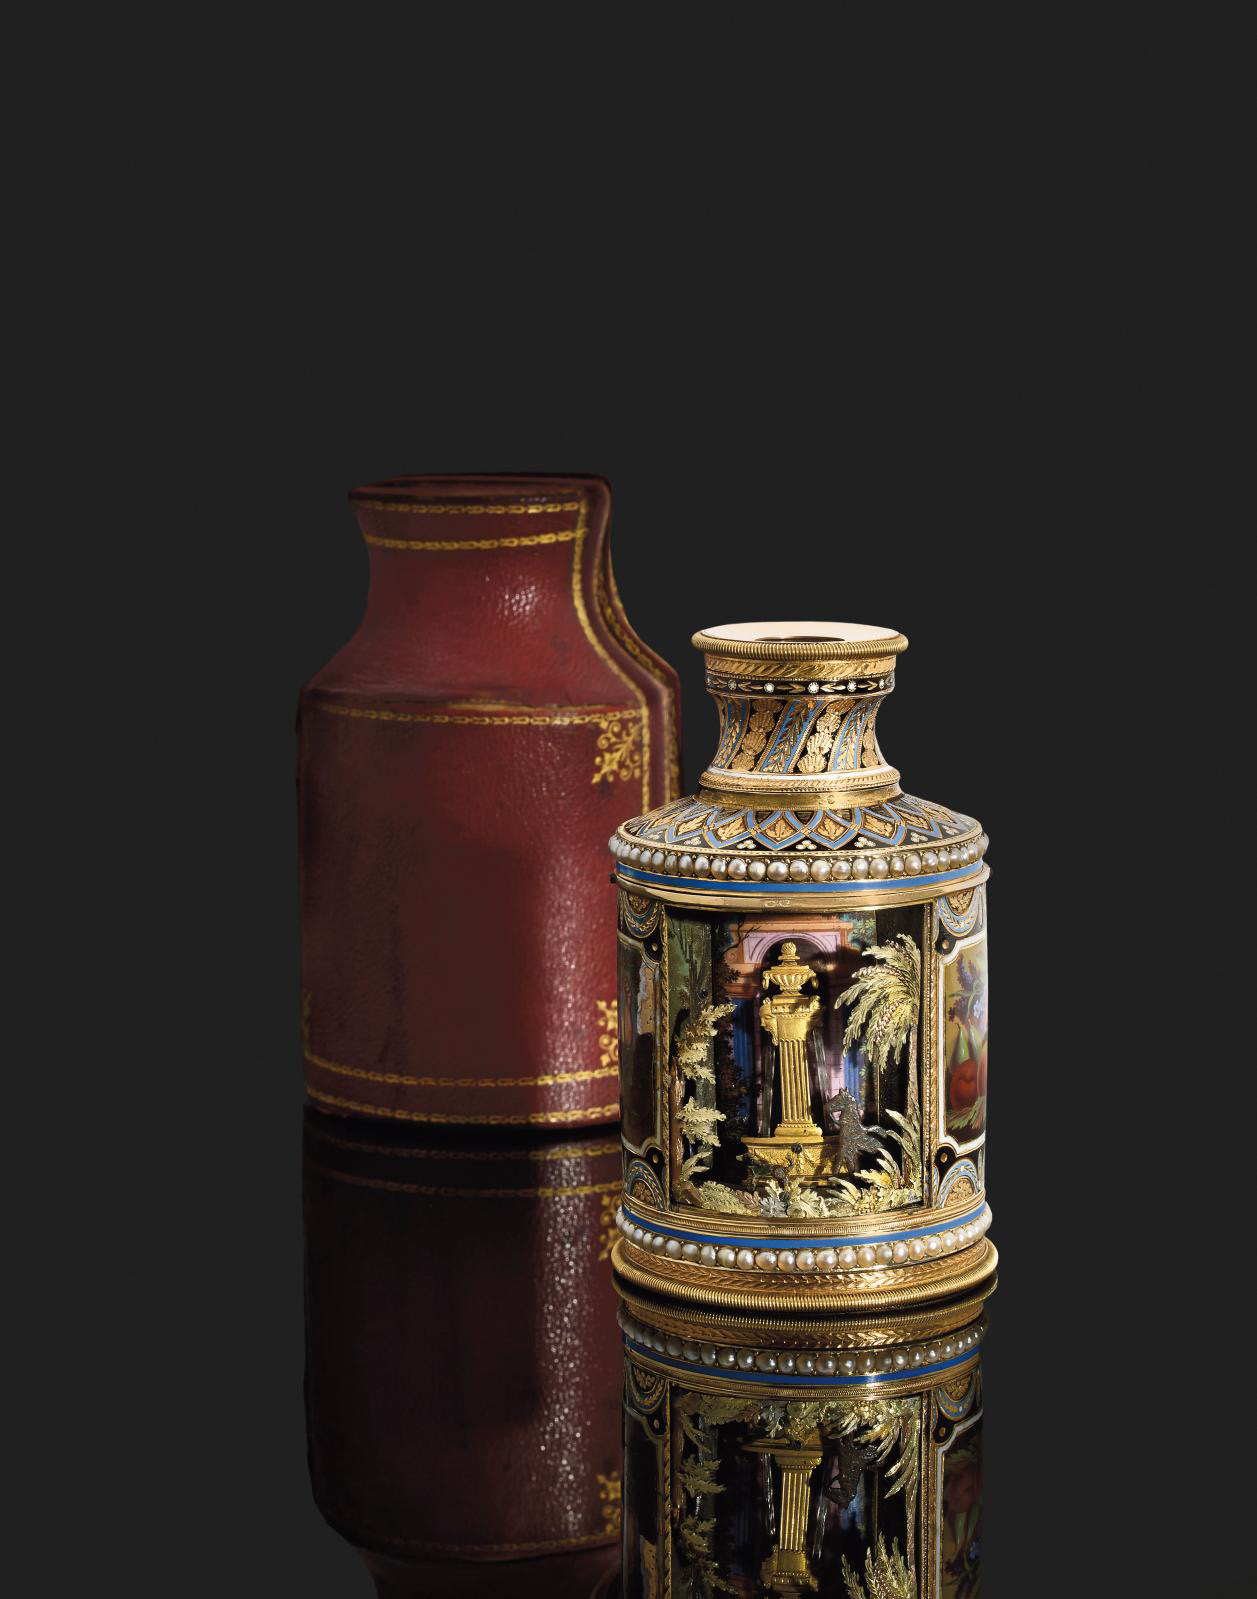 Art Price Index: Luxury 18th-Century Pocket Boxes, a Reflection of Refined Social Customs